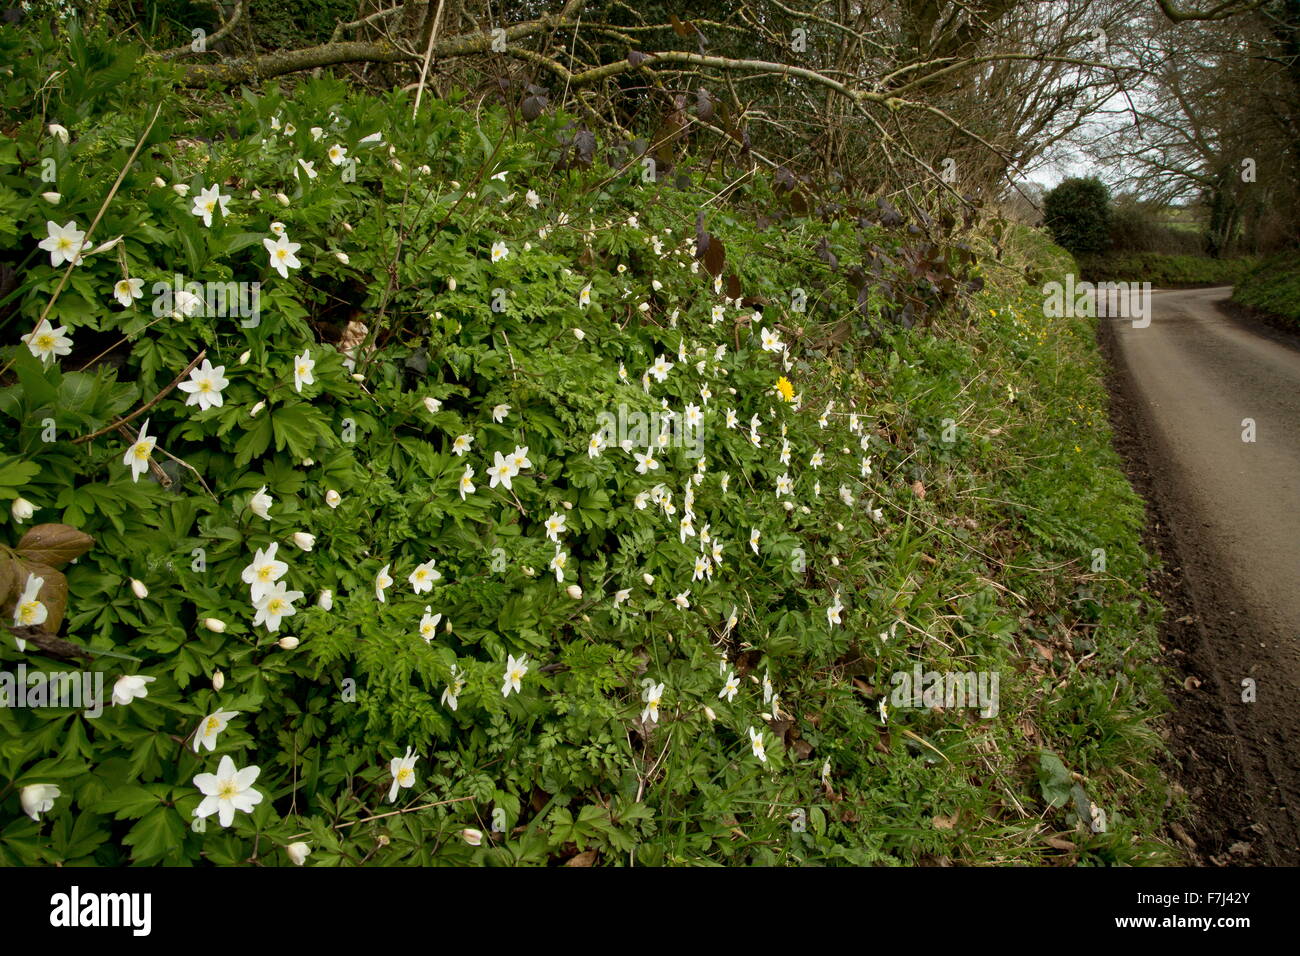 Dorset roadside verge in early spring with wood anemones and other  wildflowers, near Silton, Dorset. Stock Photo